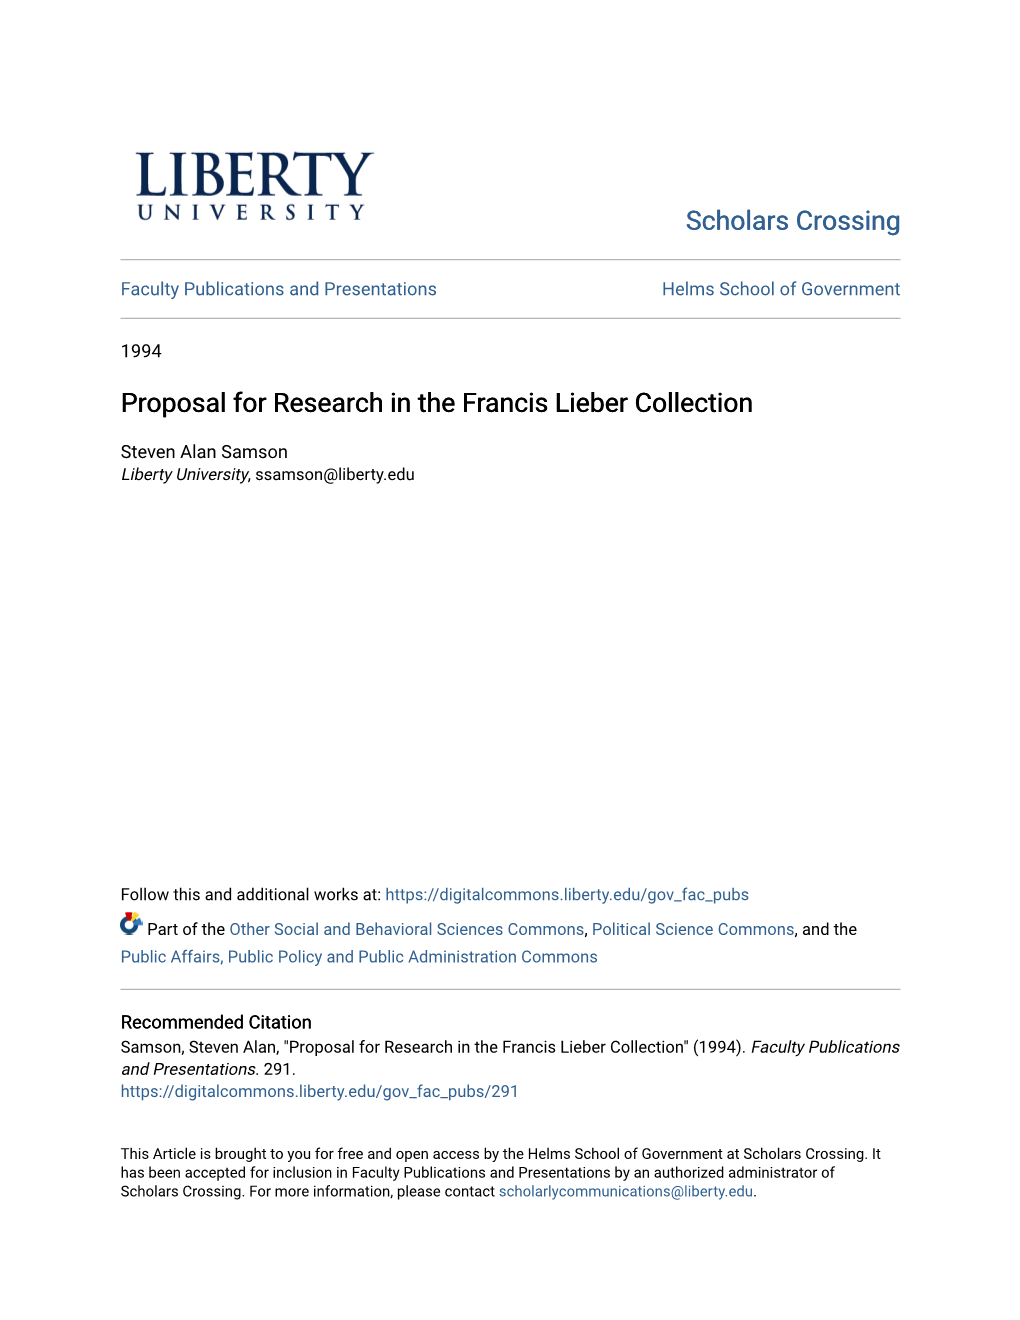 Proposal for Research in the Francis Lieber Collection